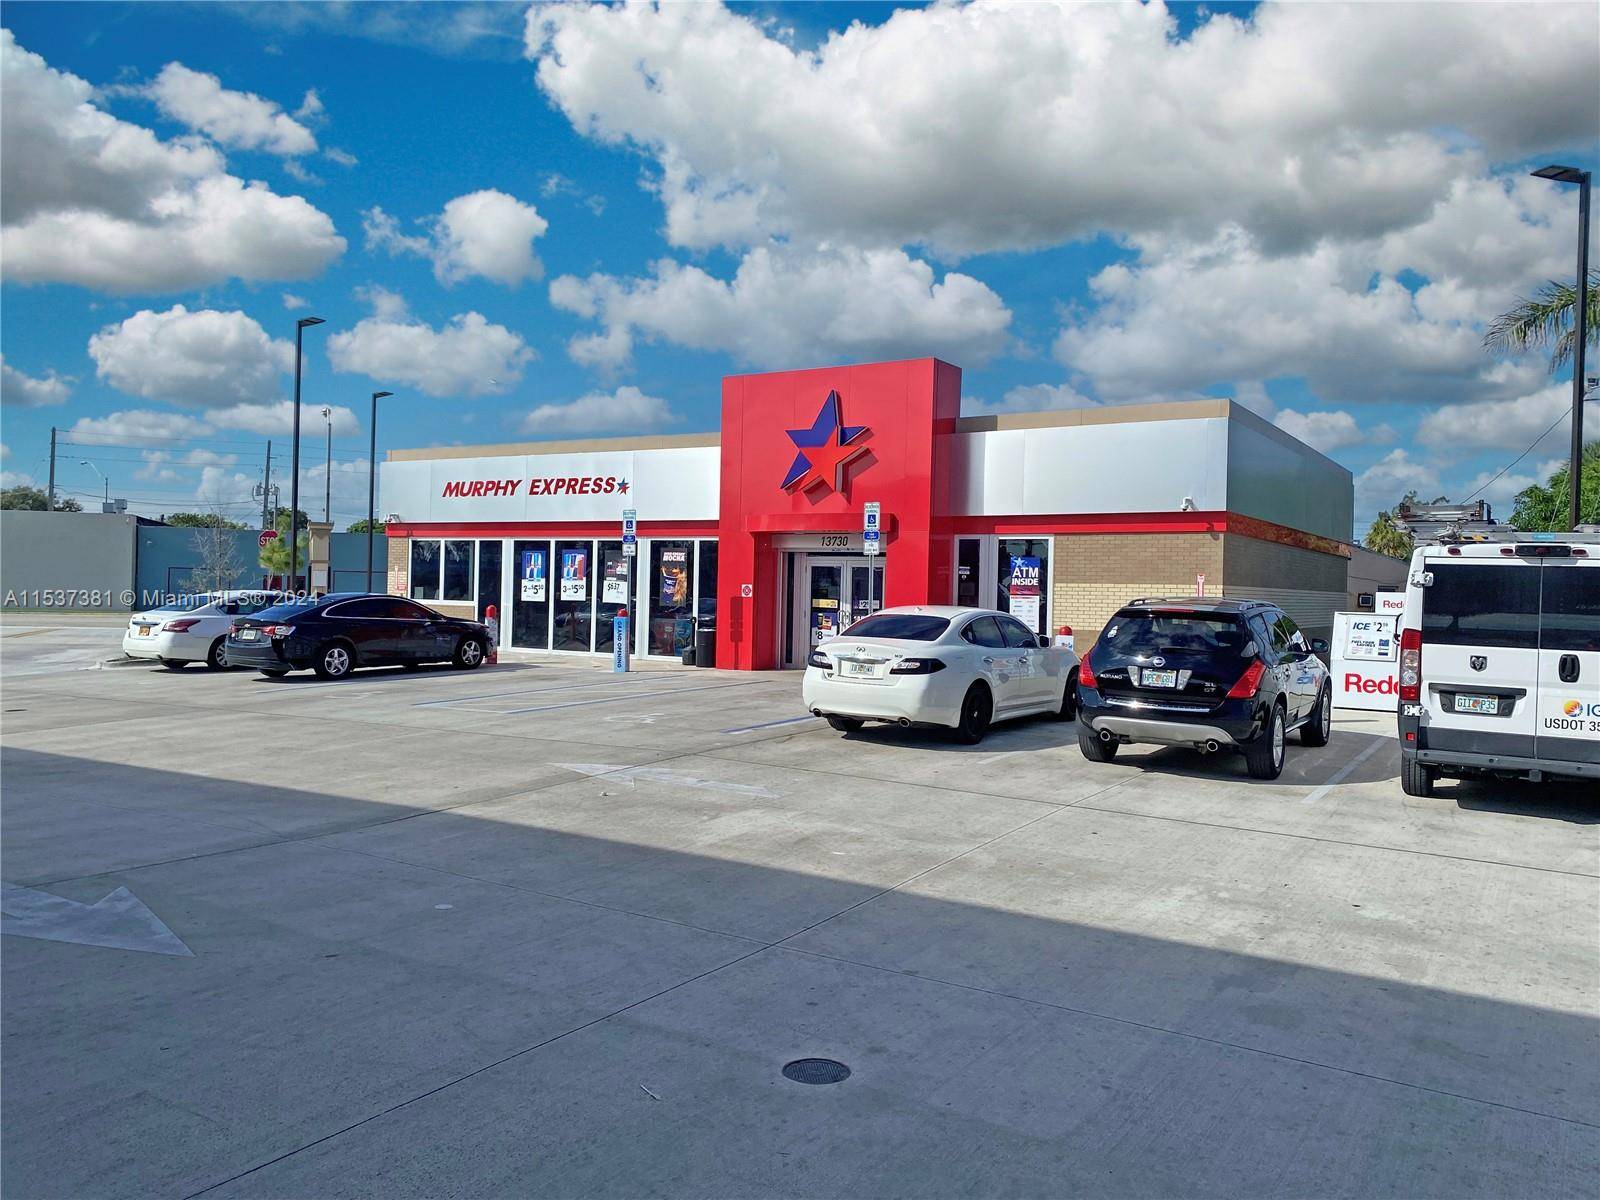 BRAND NEW 20 YEAR LEASE LEADING RETAILER OF GAS C STORE PUBLICLY TRADED COMPANY 6.